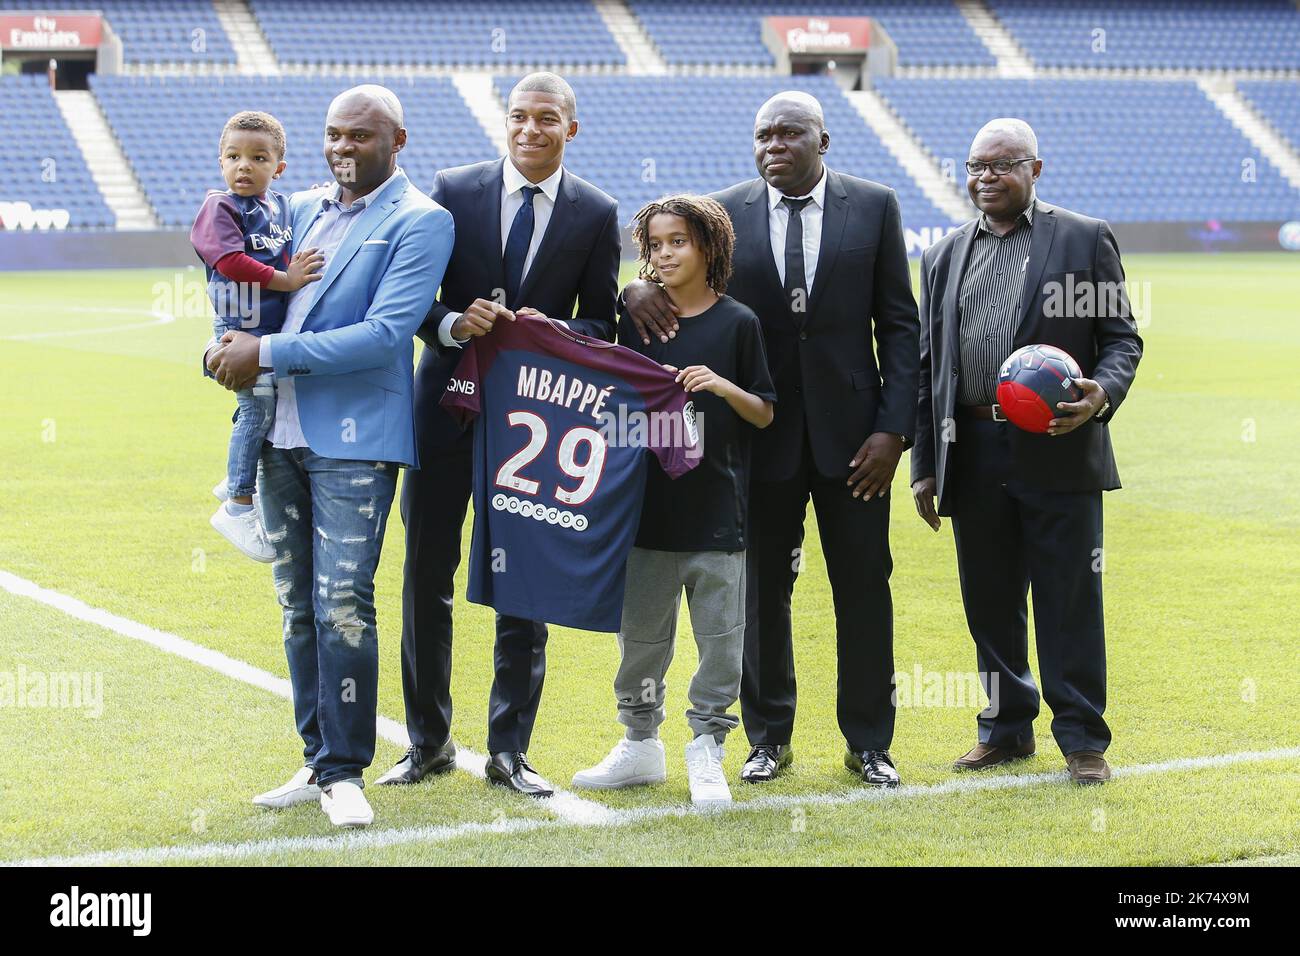 Paris Saint-Germain's new forward Kylian Mbappe together with father Wilfried Mbappe and his brother Ethan and other members of his family pose for a photo during the presentation of his jersey at the Parc des Princes stadium in Paris Stock Photo